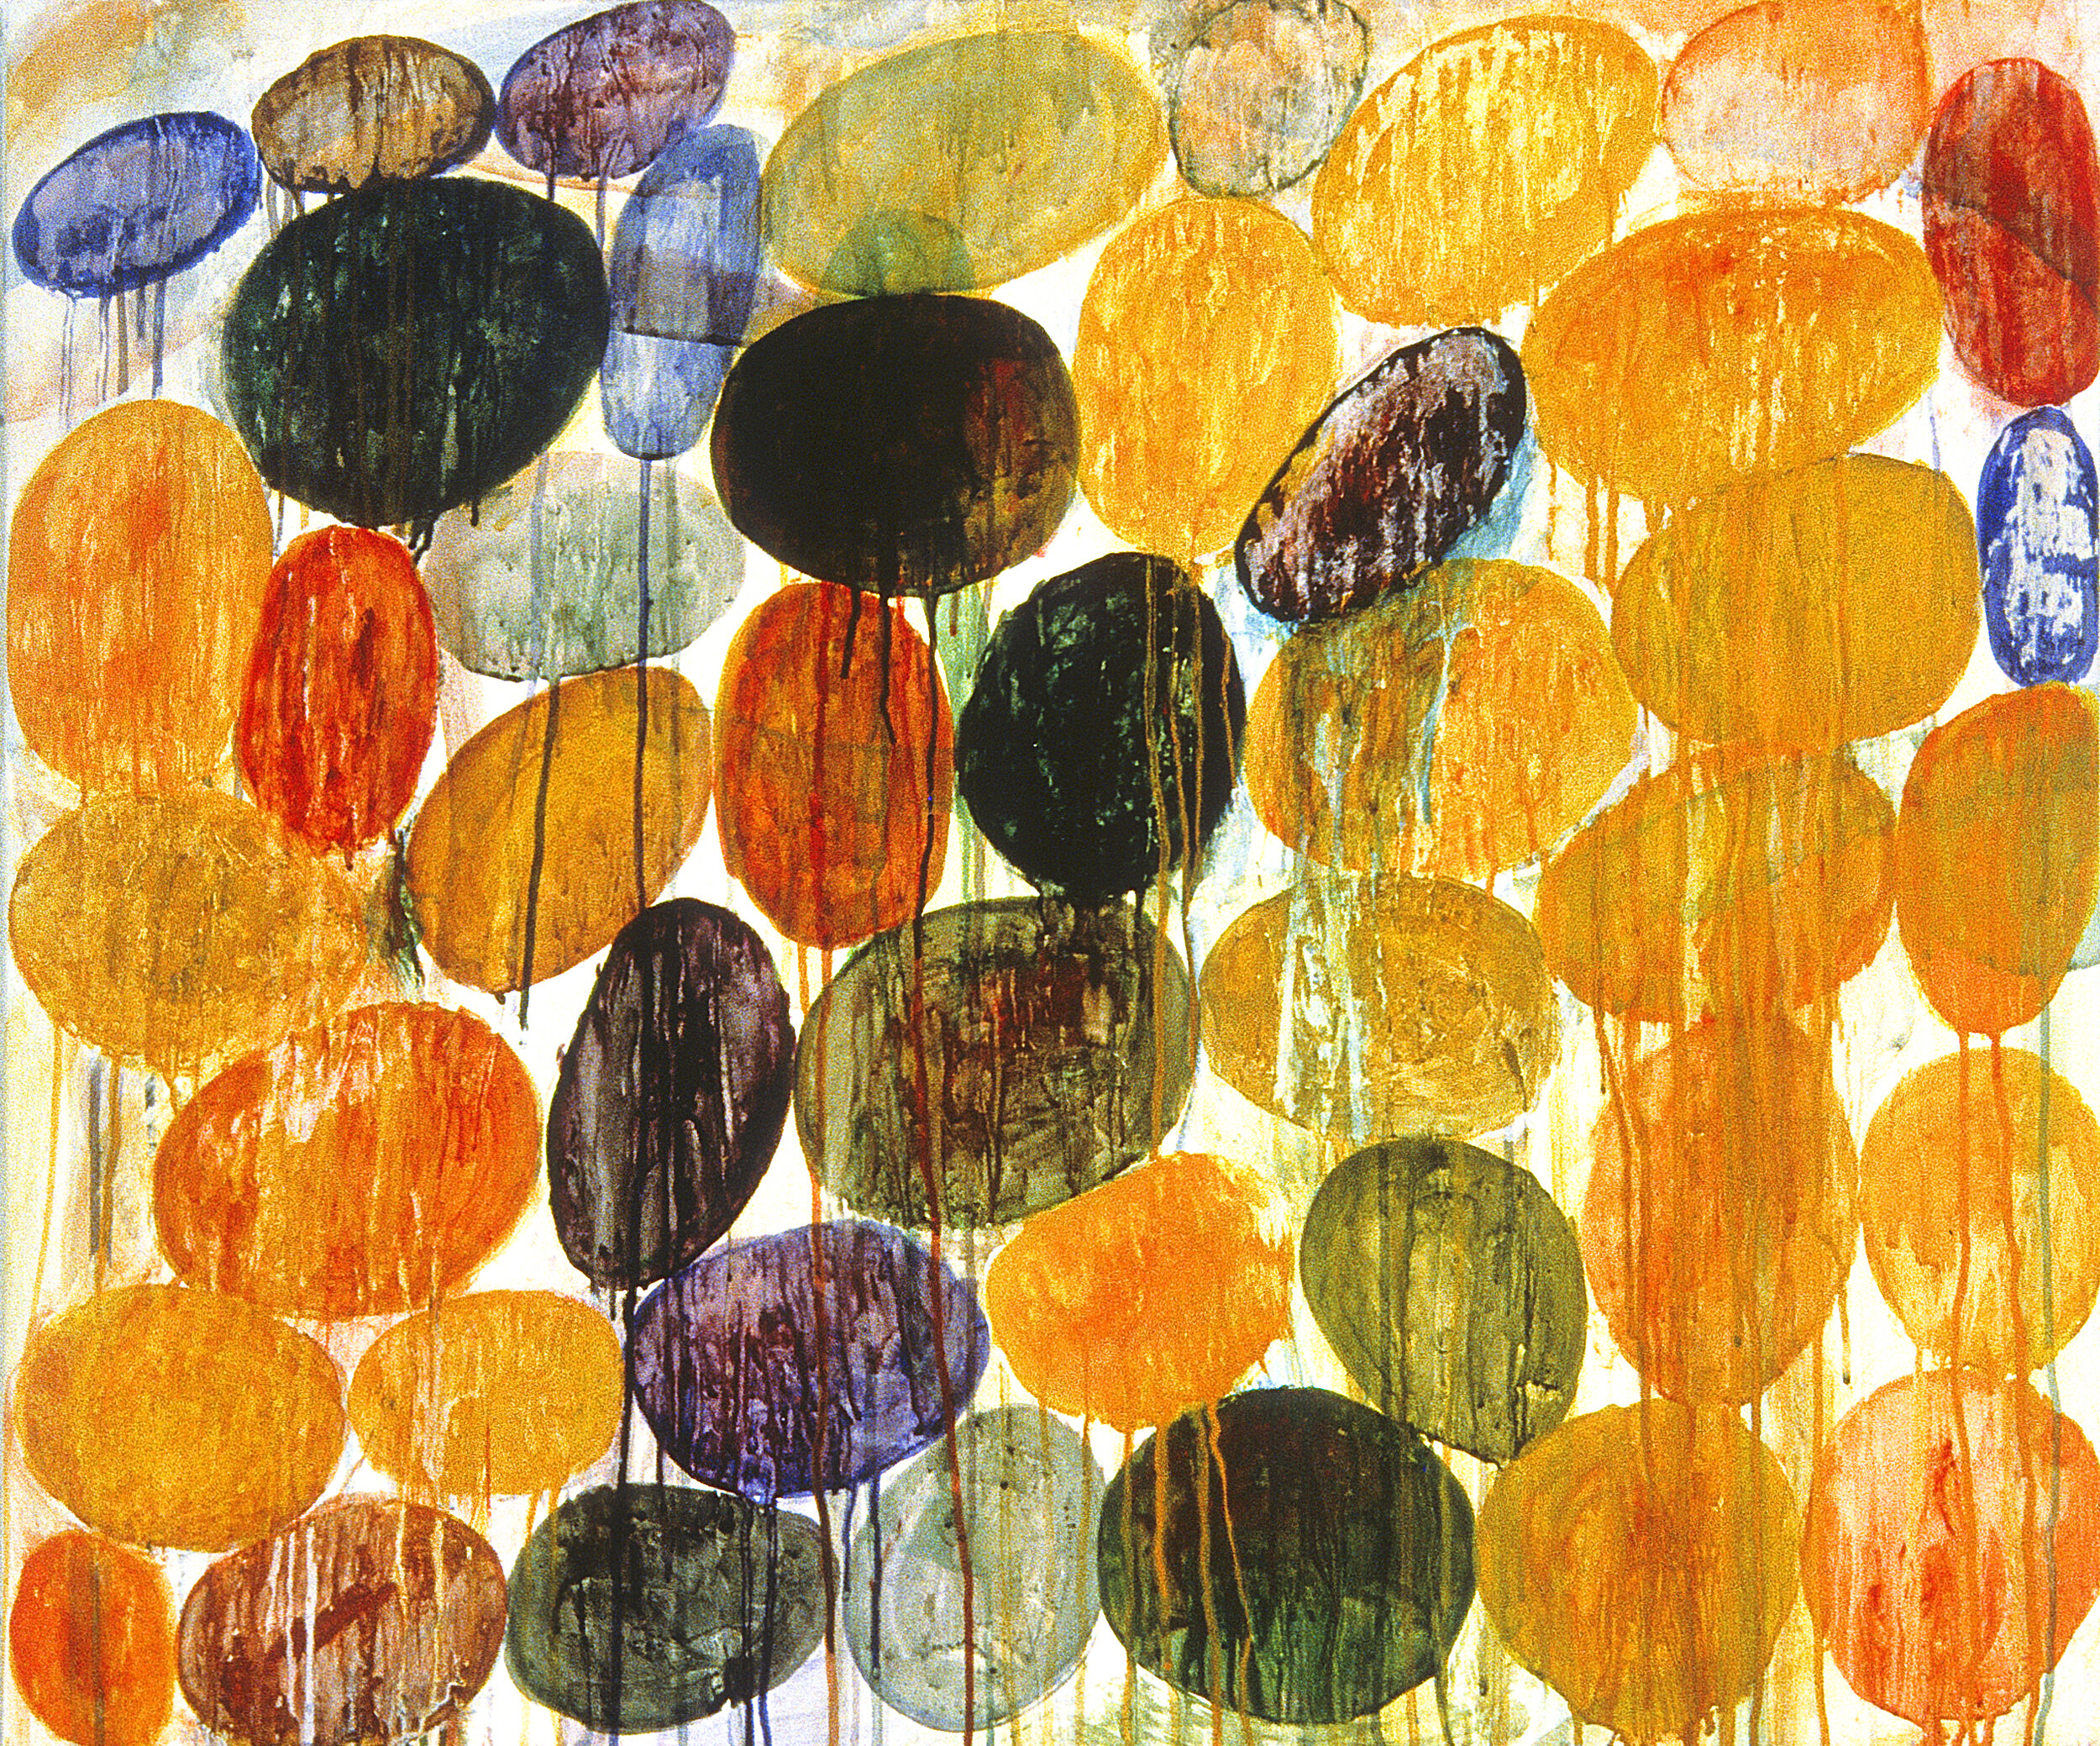   Treasure , 1989, acrylic, vellum mounted on canvas, 28 3/4 x 34 1/4 inches   